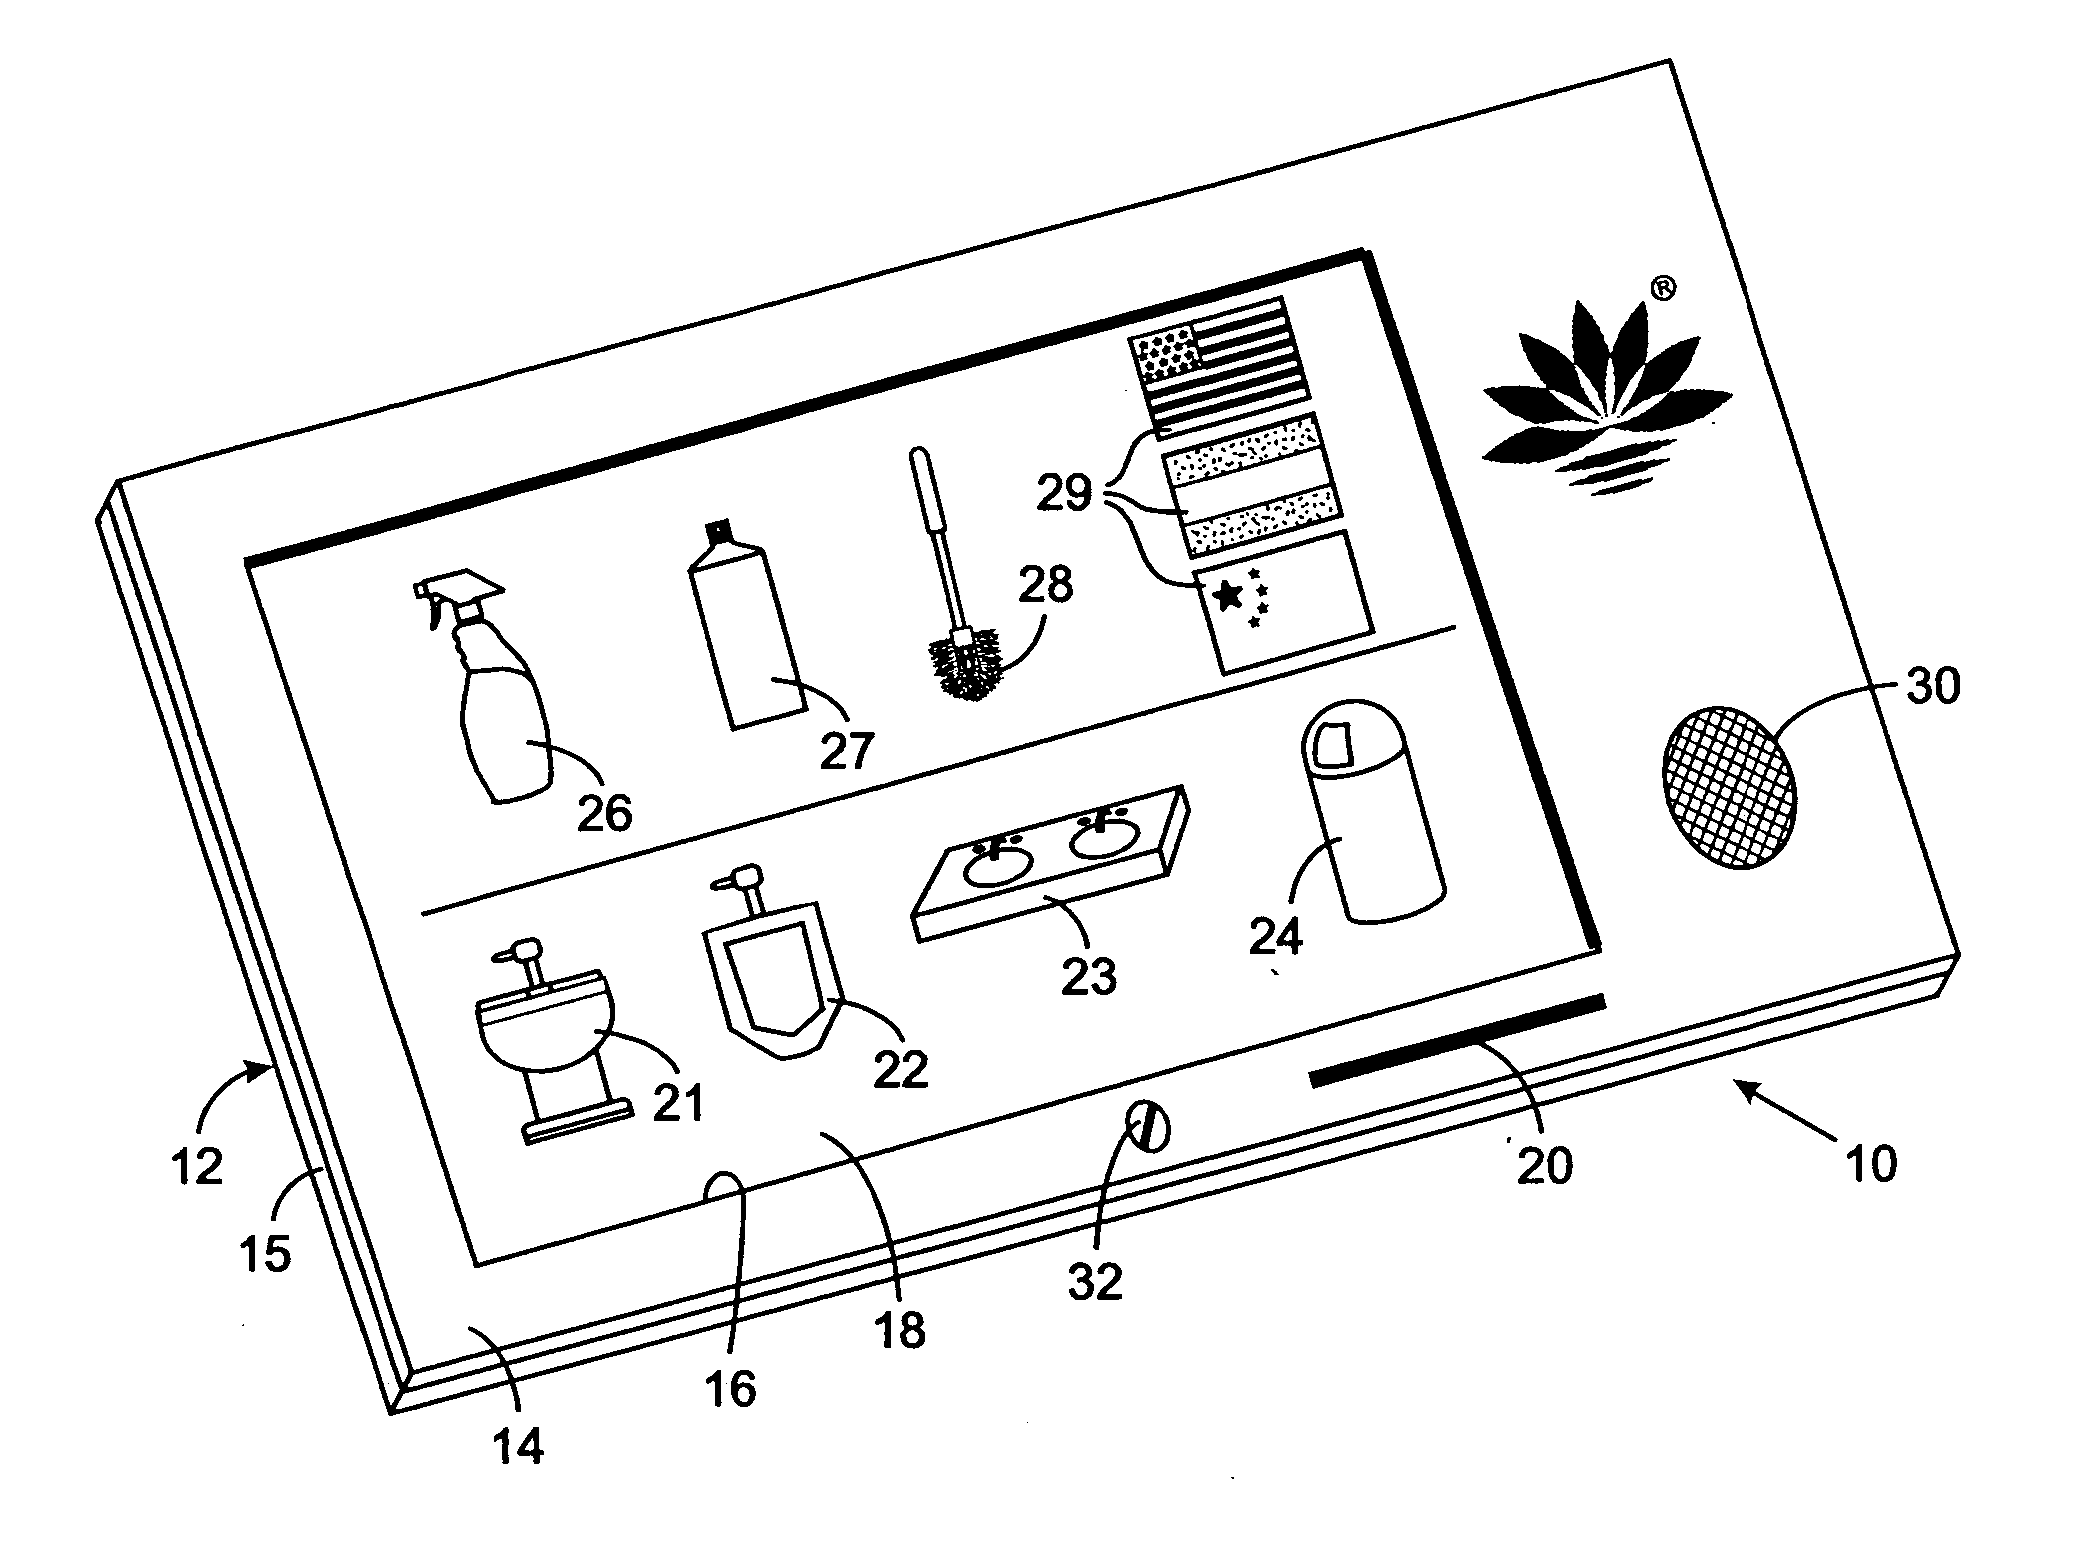 Vocational training apparatus that provides audio instructions